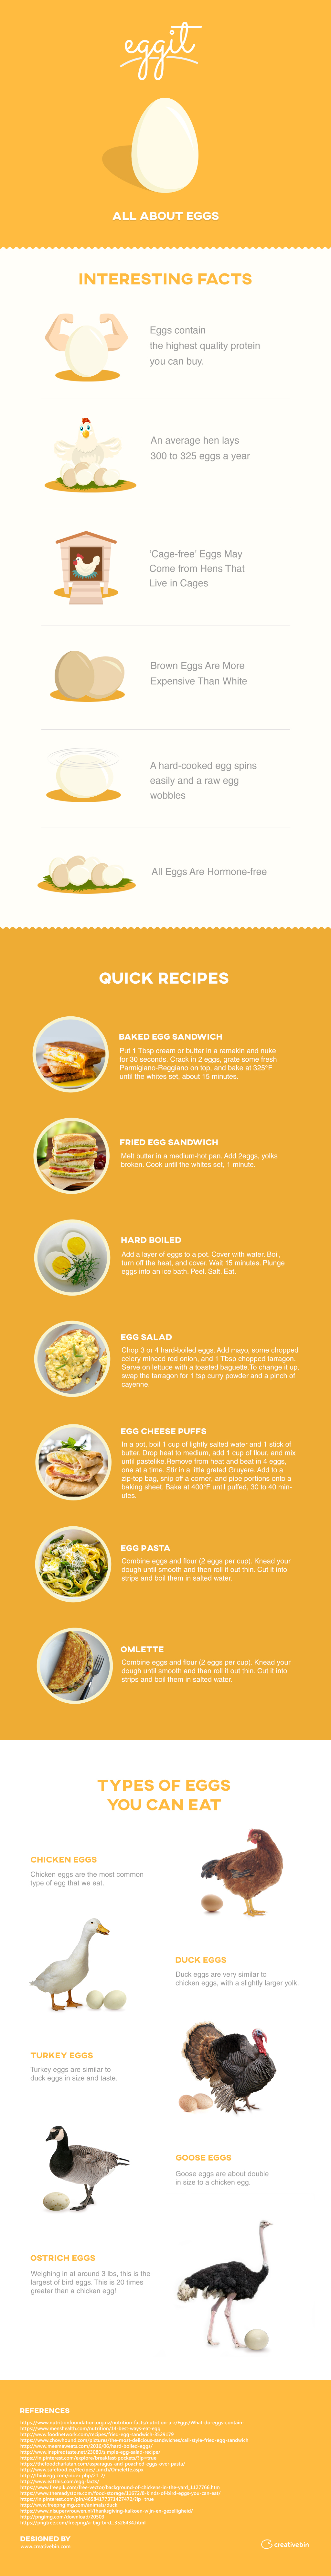 Egg Benefits & Facts - Infographic